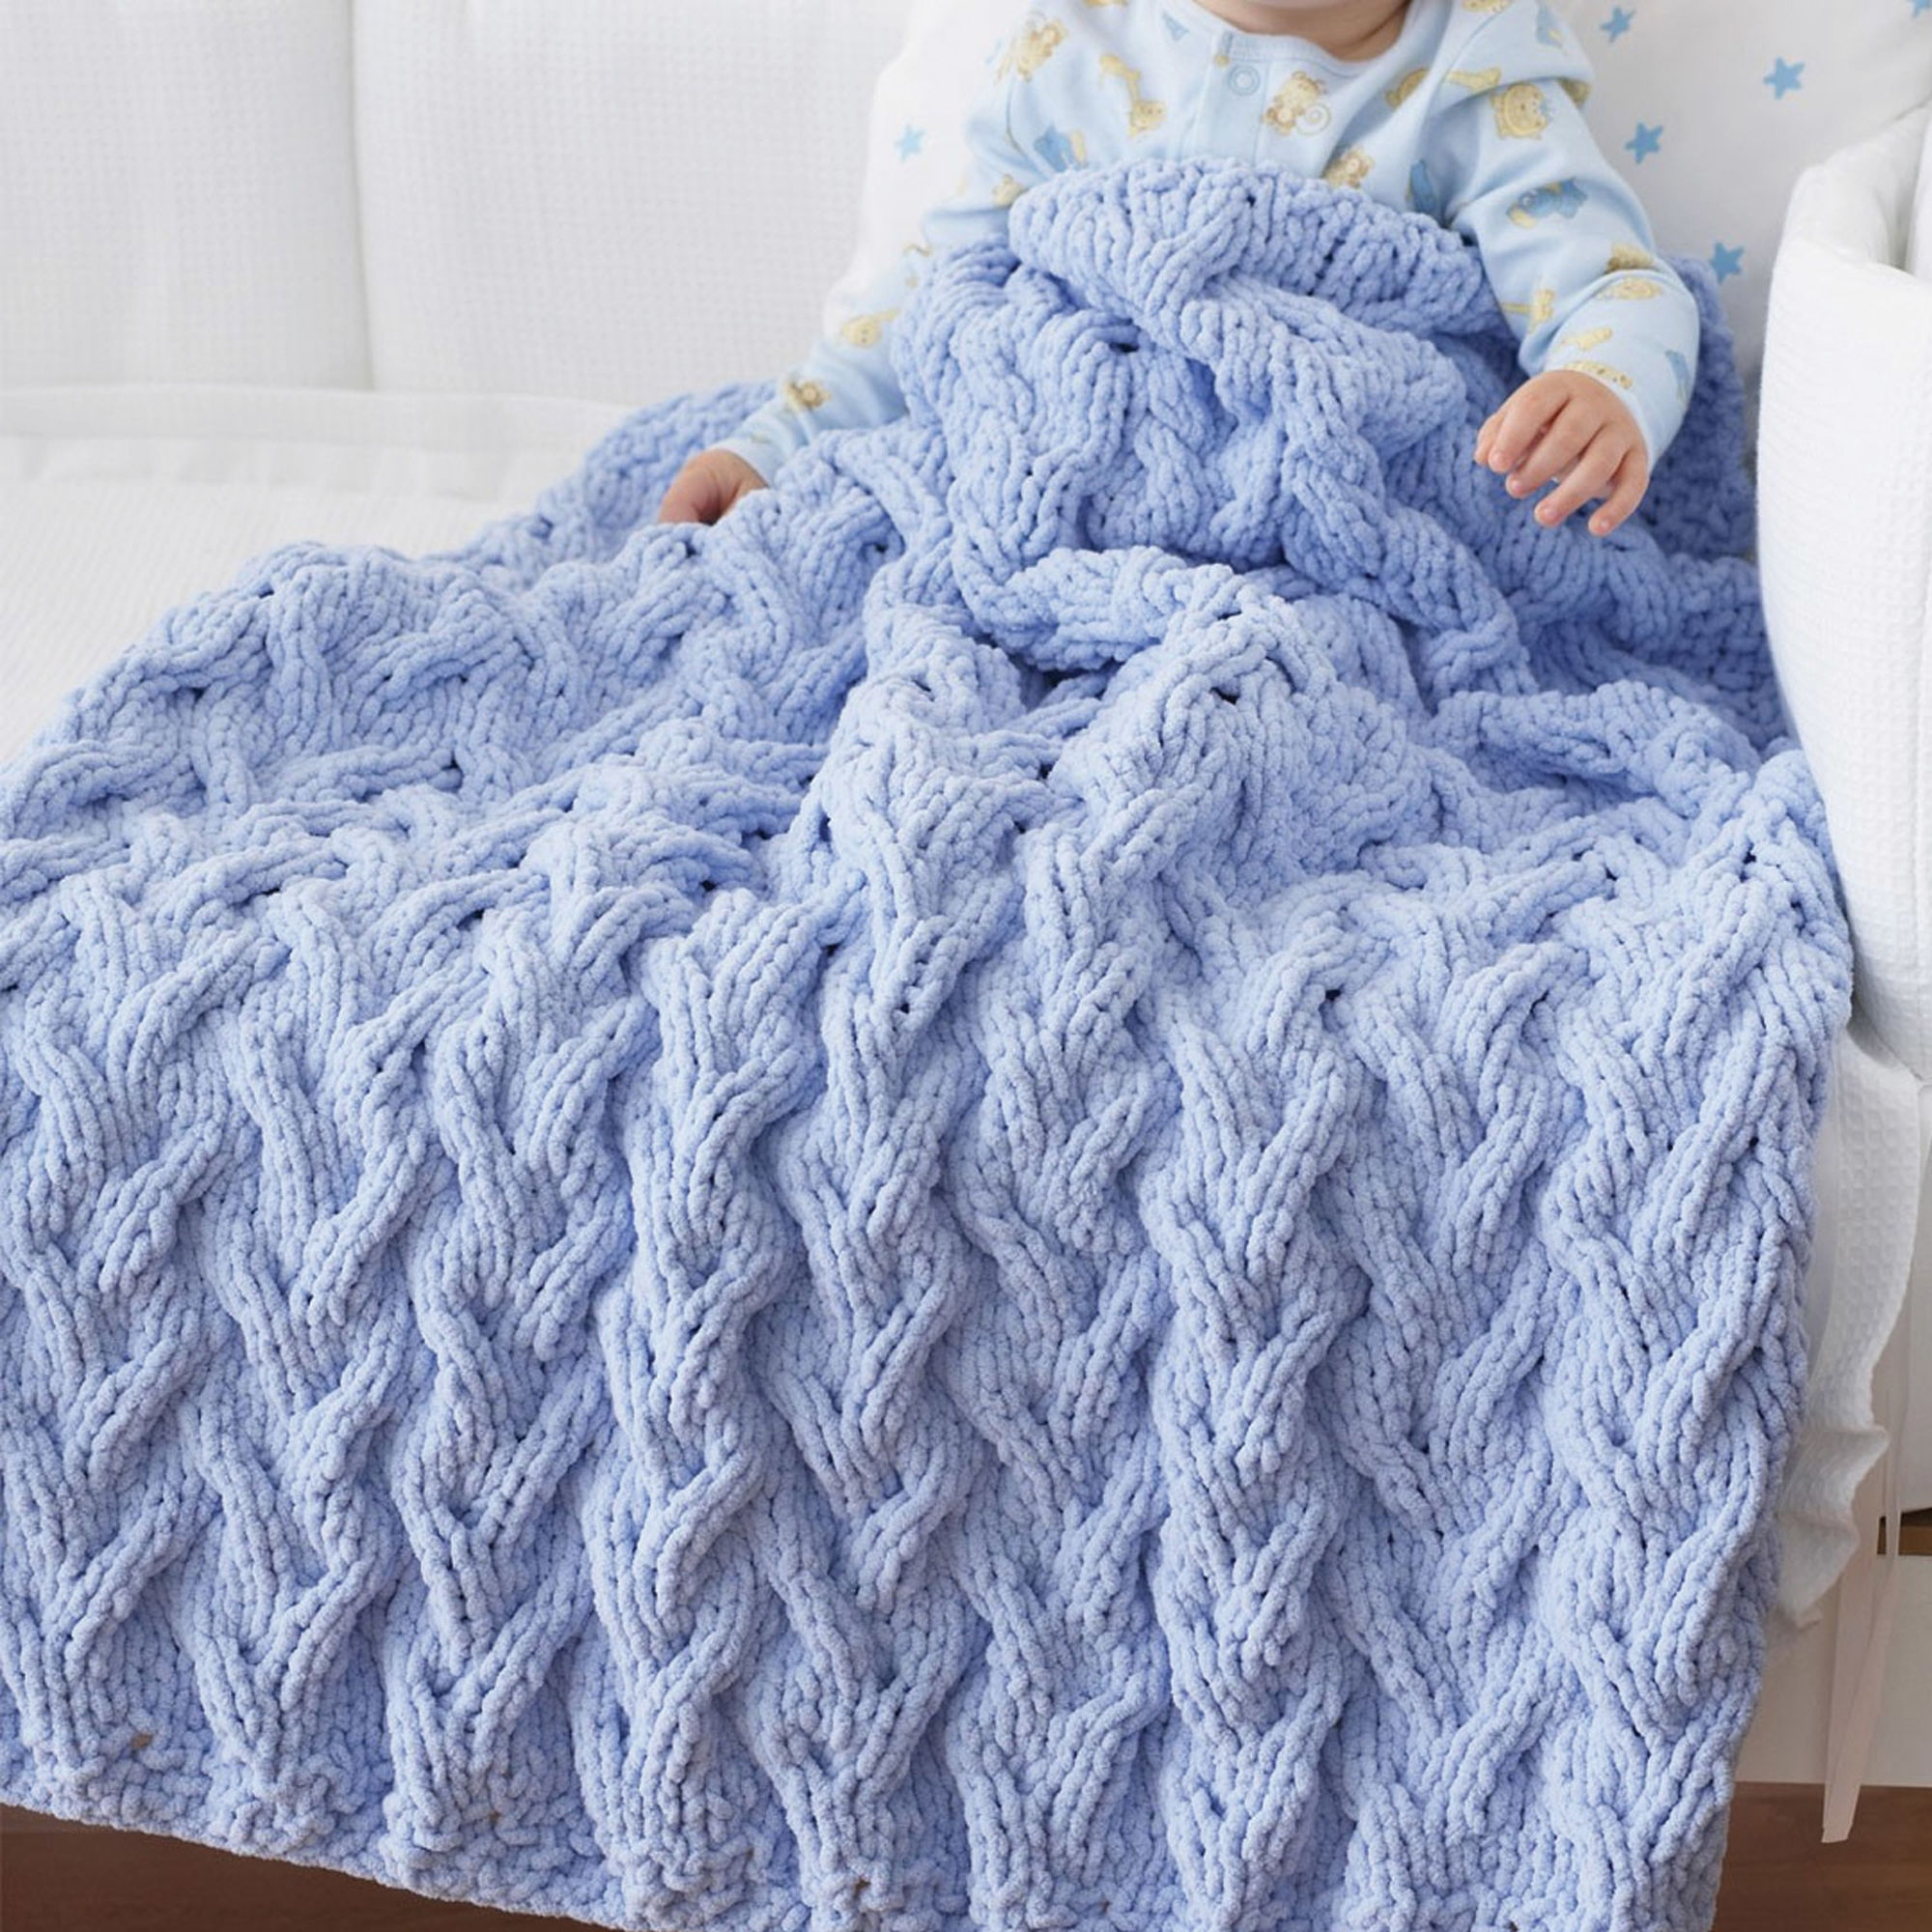 Free Knitting Afghan Patterns For Beginners Lovely Cabled Ba Blanket Free Knitting Pattern